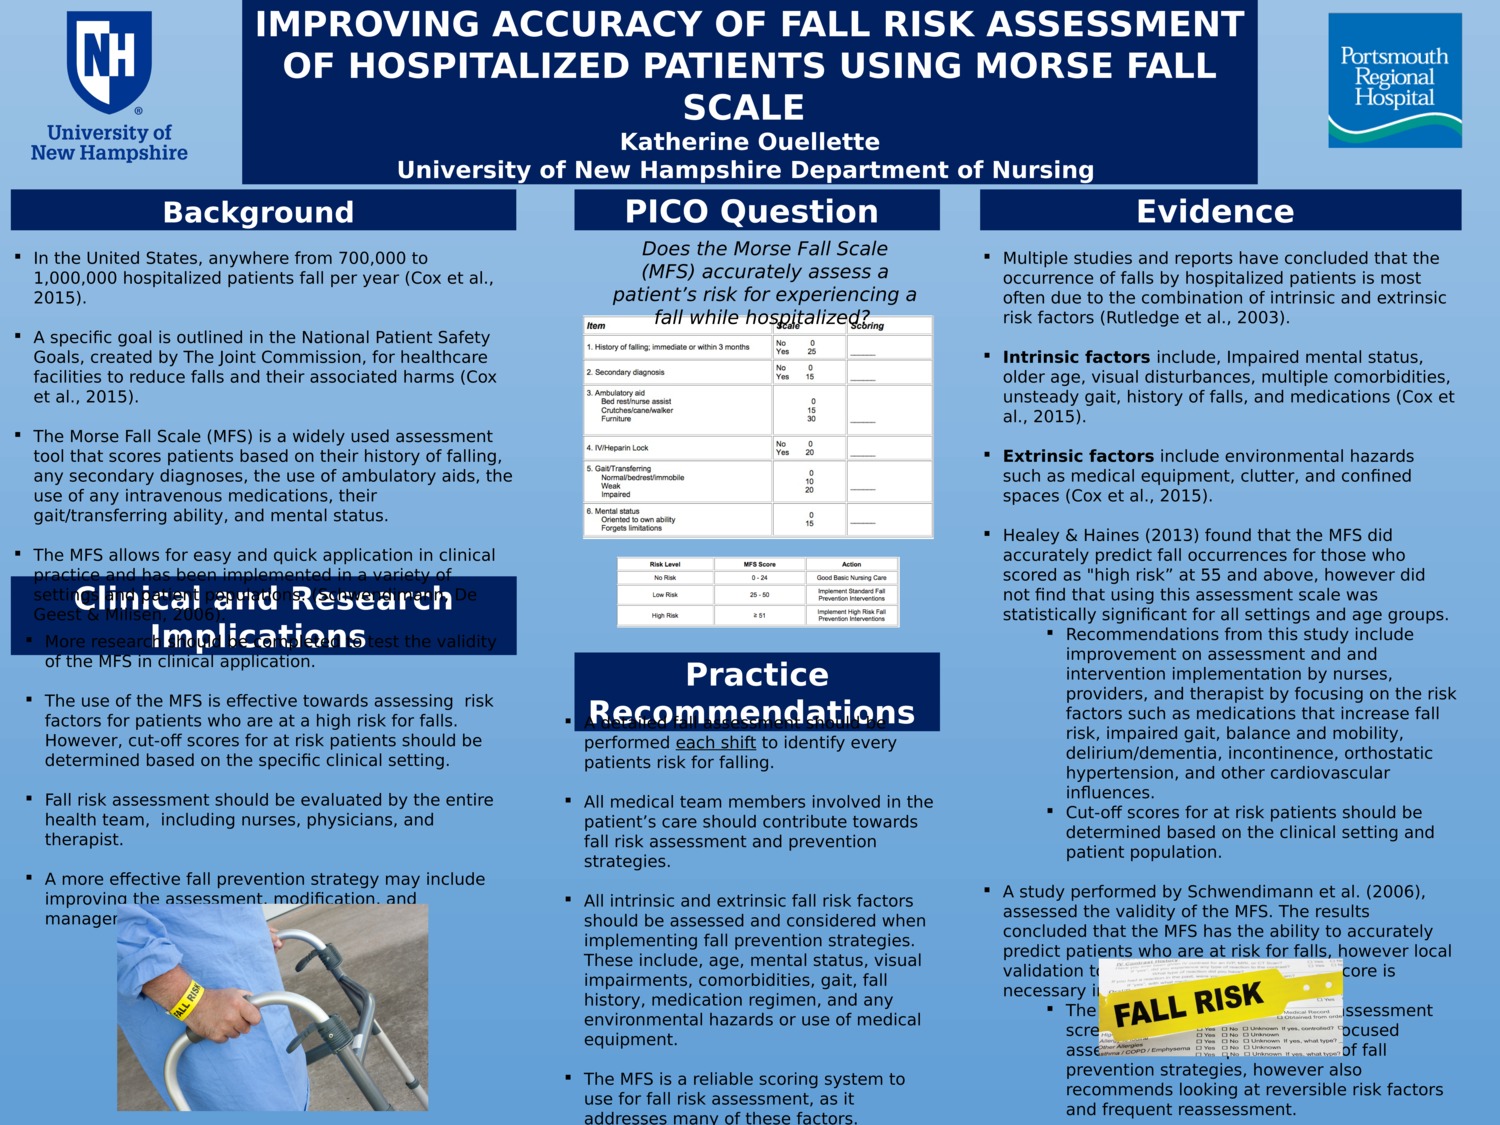 Improving Accuracy Of Fall Risk Assessment Of Hospitalized Patients Using Morse Fall Scale  by keo2002